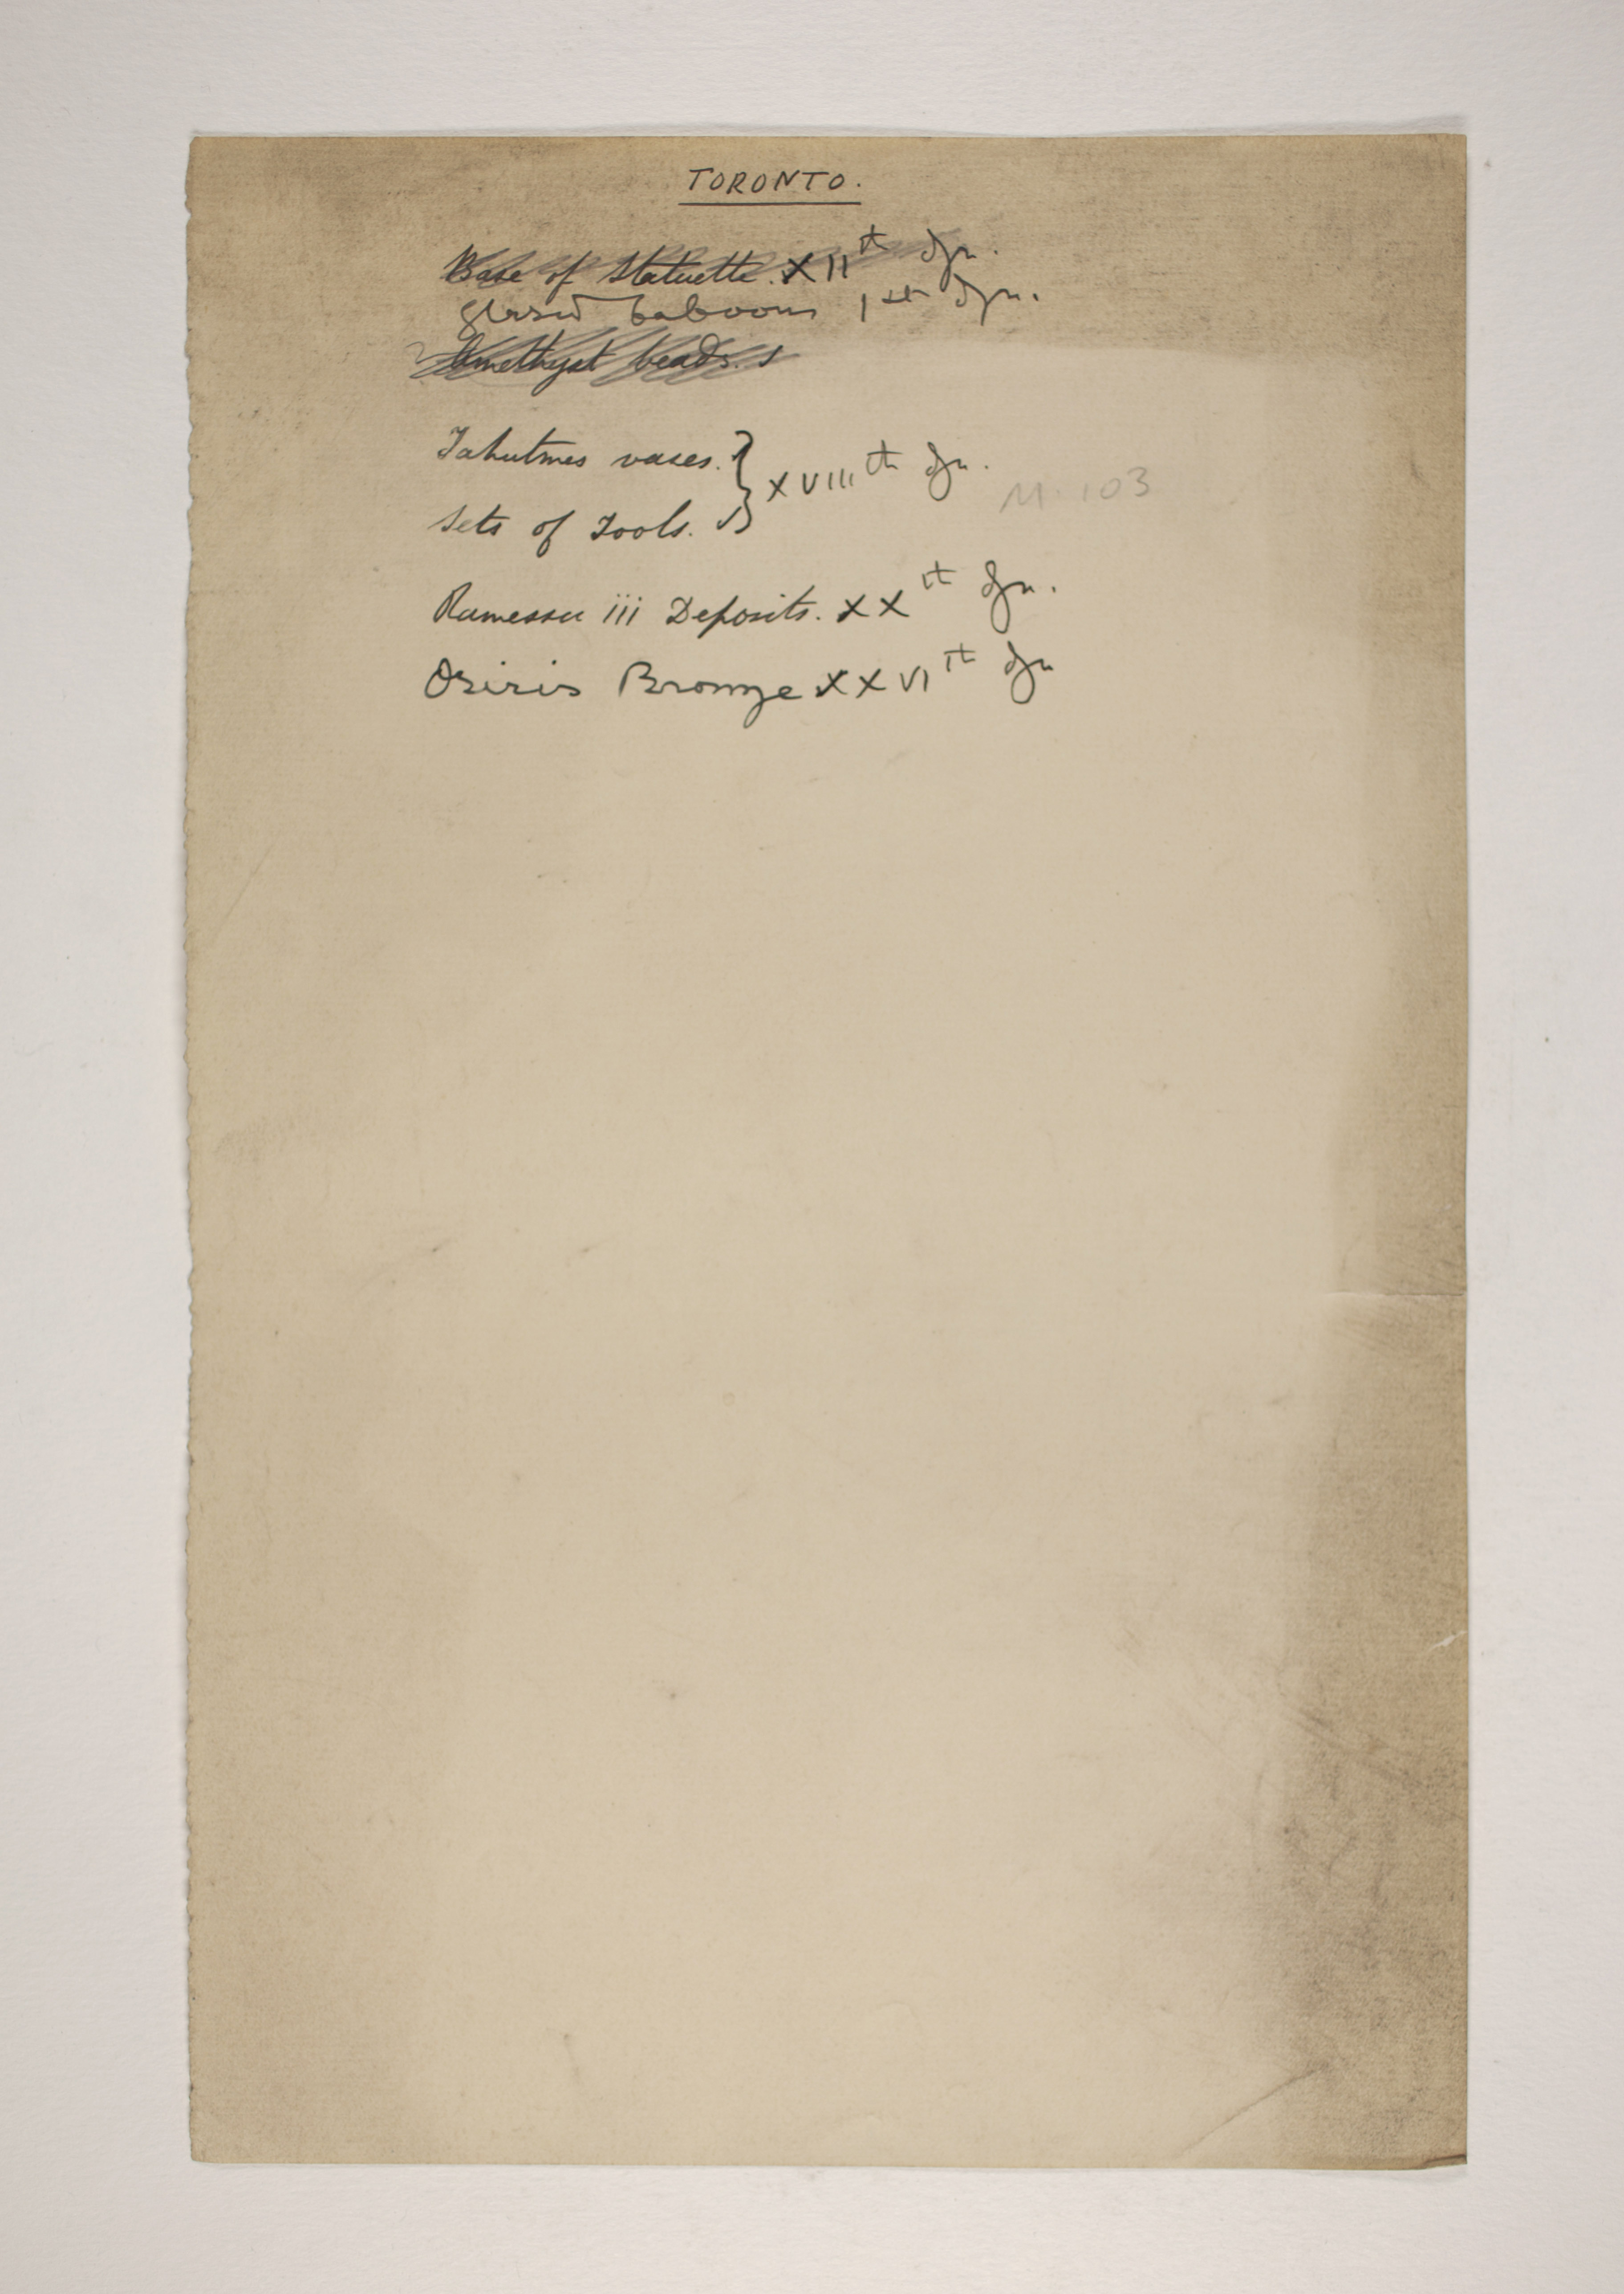 1902-03 Abydos Individual institution list  PMA/WFP1/D/11/58